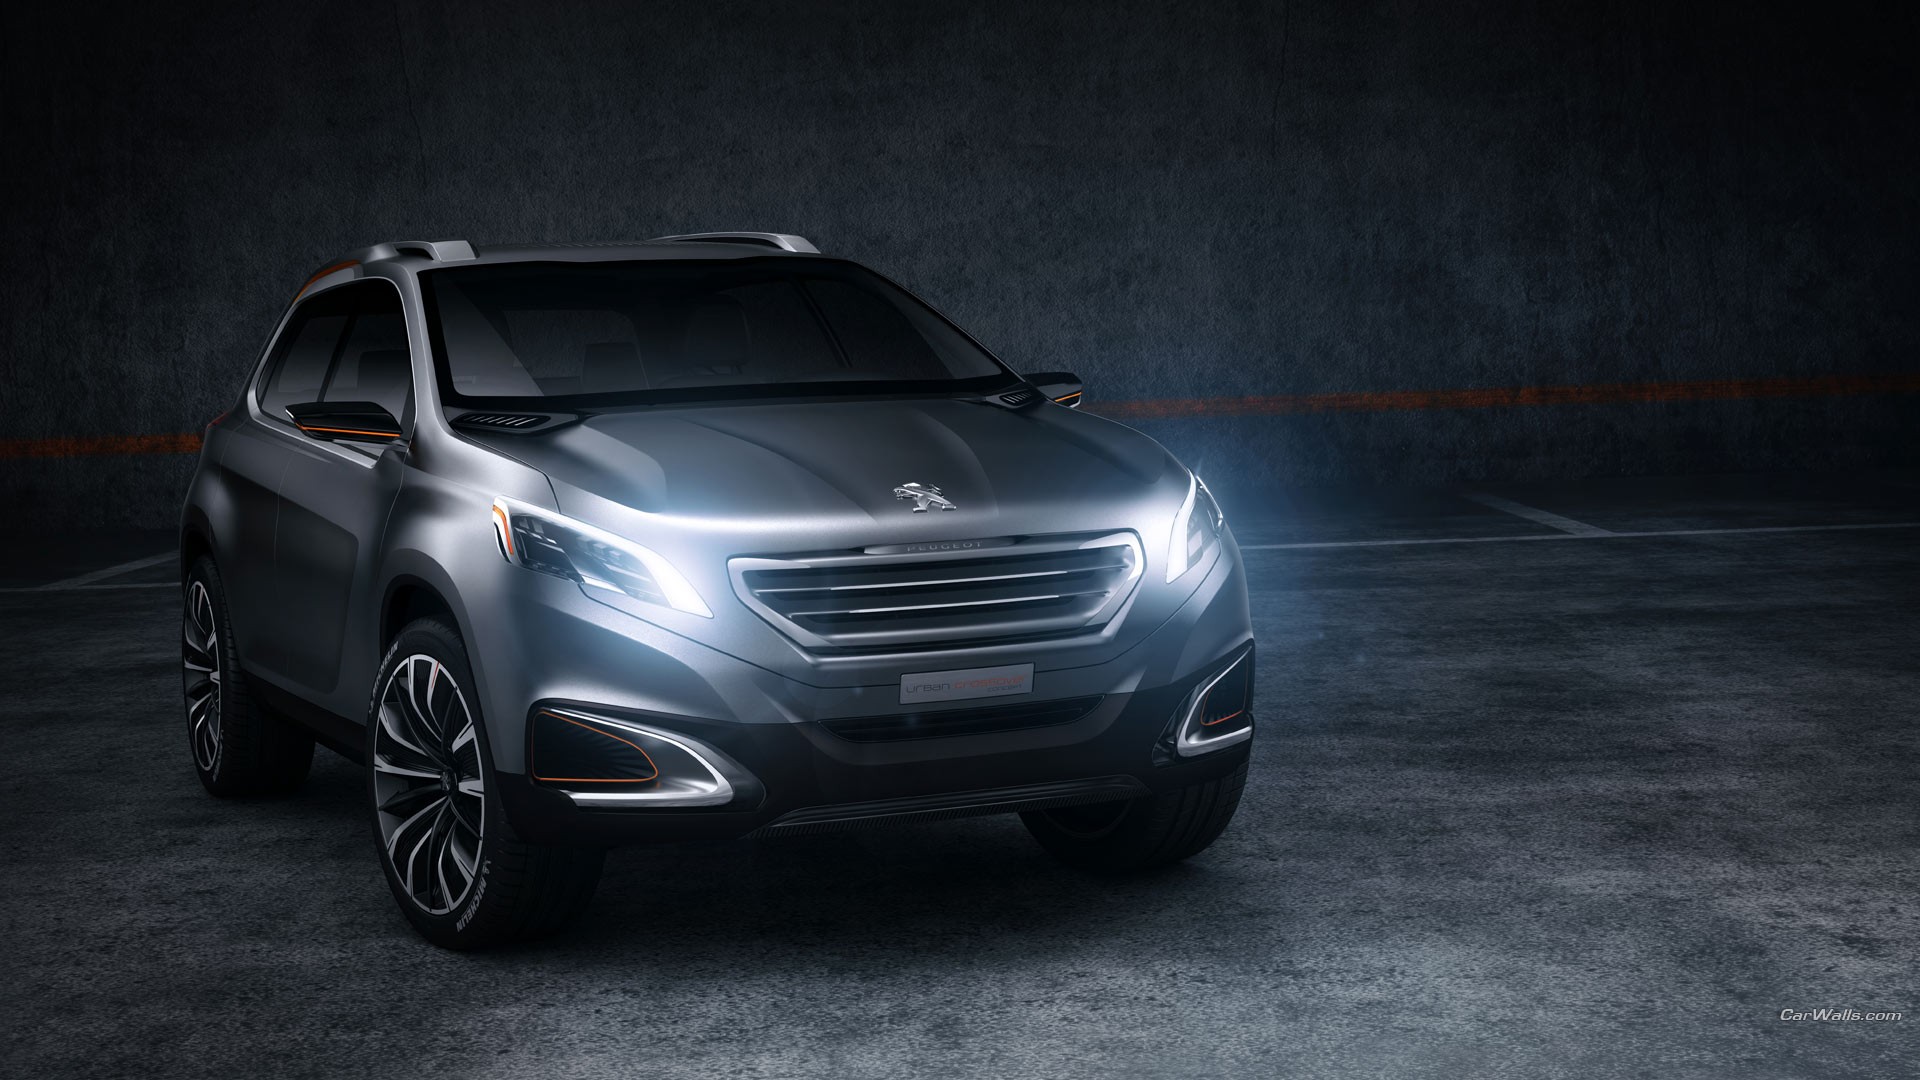 Peugeot Urban Crossover, Concept Cars, Car, SUV, French Cars Wallpaper